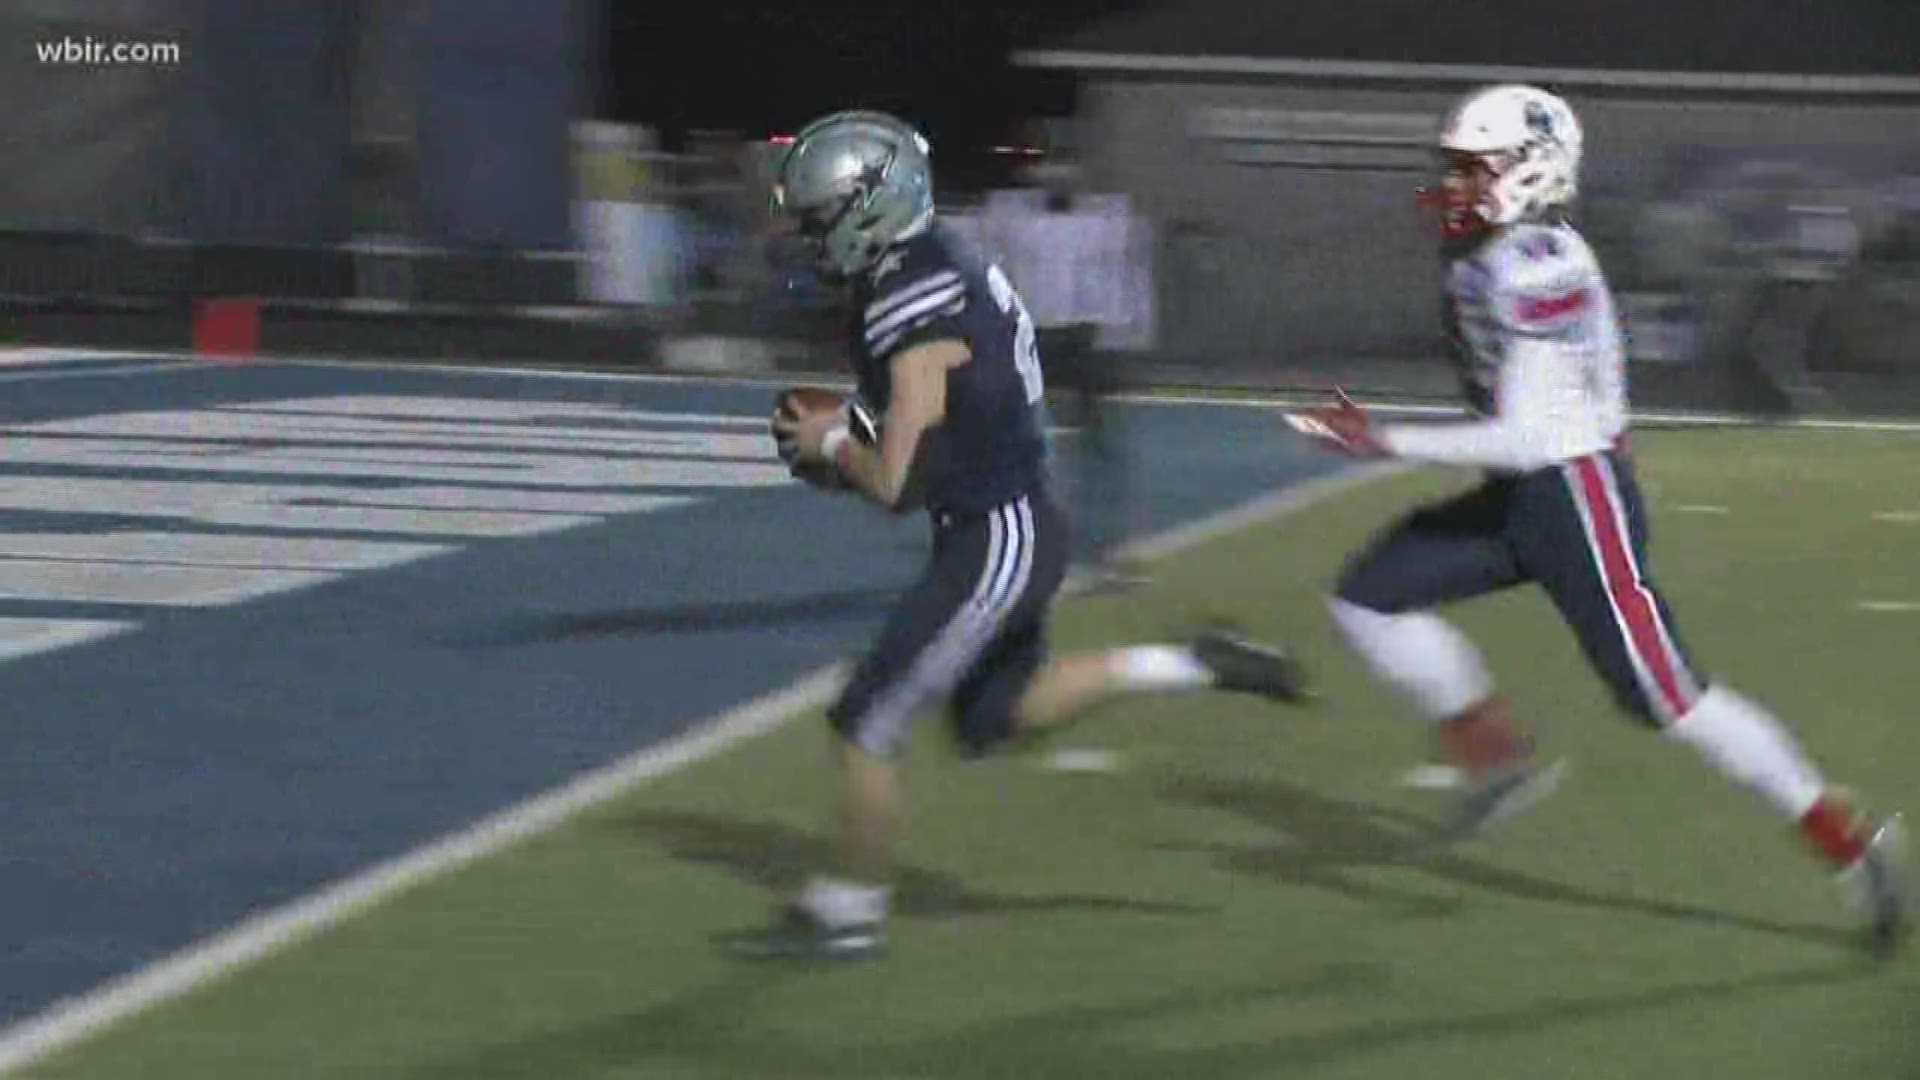 Farragut gets into the playoffs as they defeat Jefferson County in week 11.